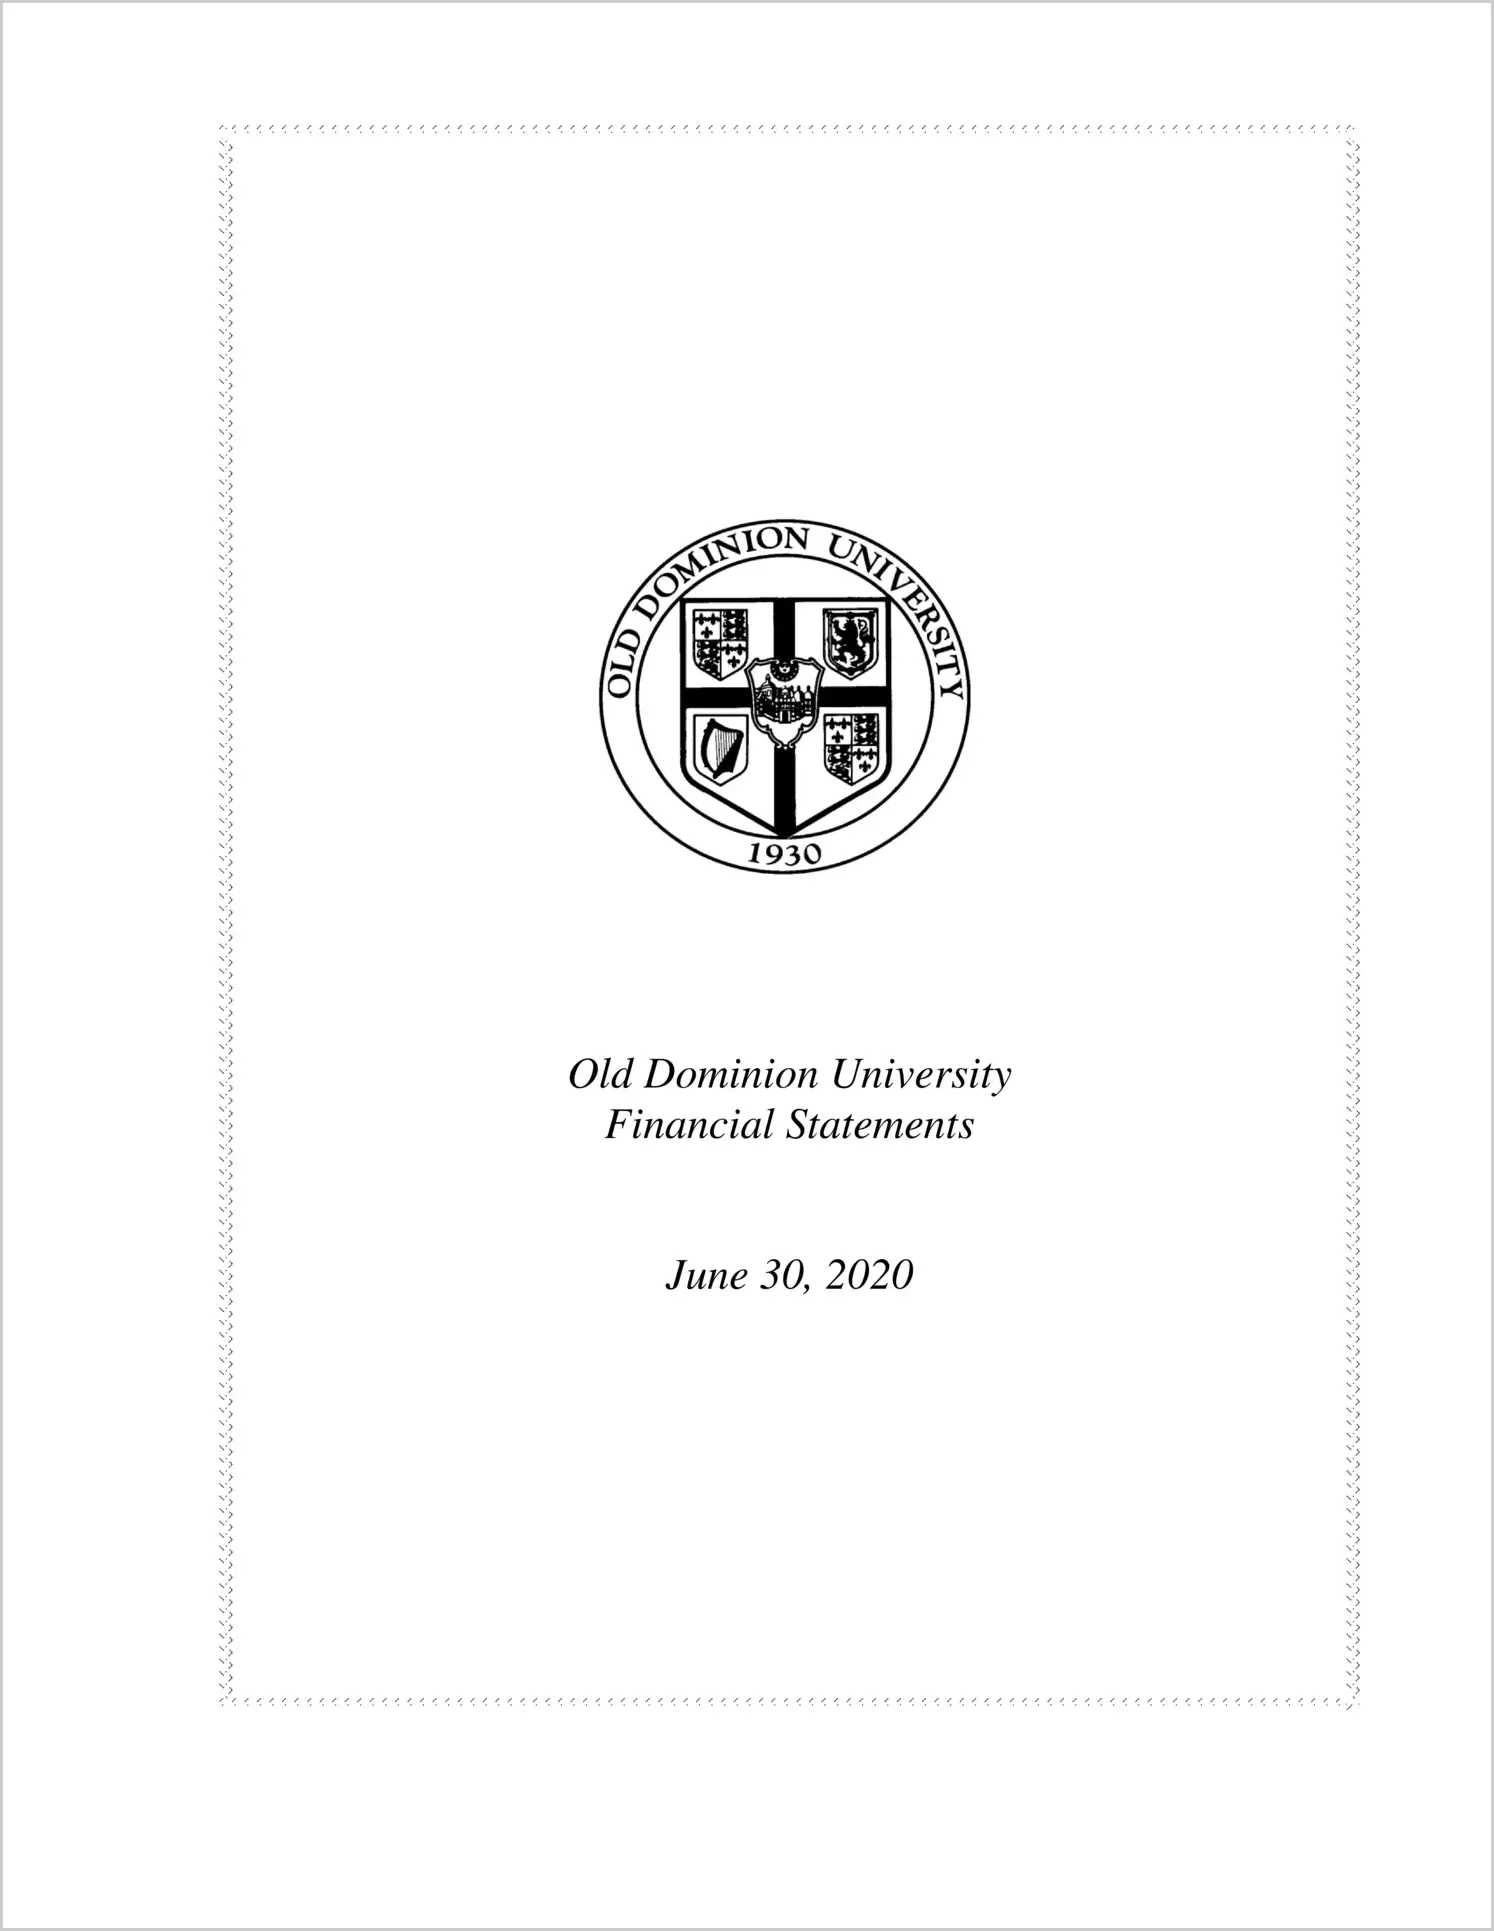 Old Dominion University Financial Statements for the year ended June 30, 2020